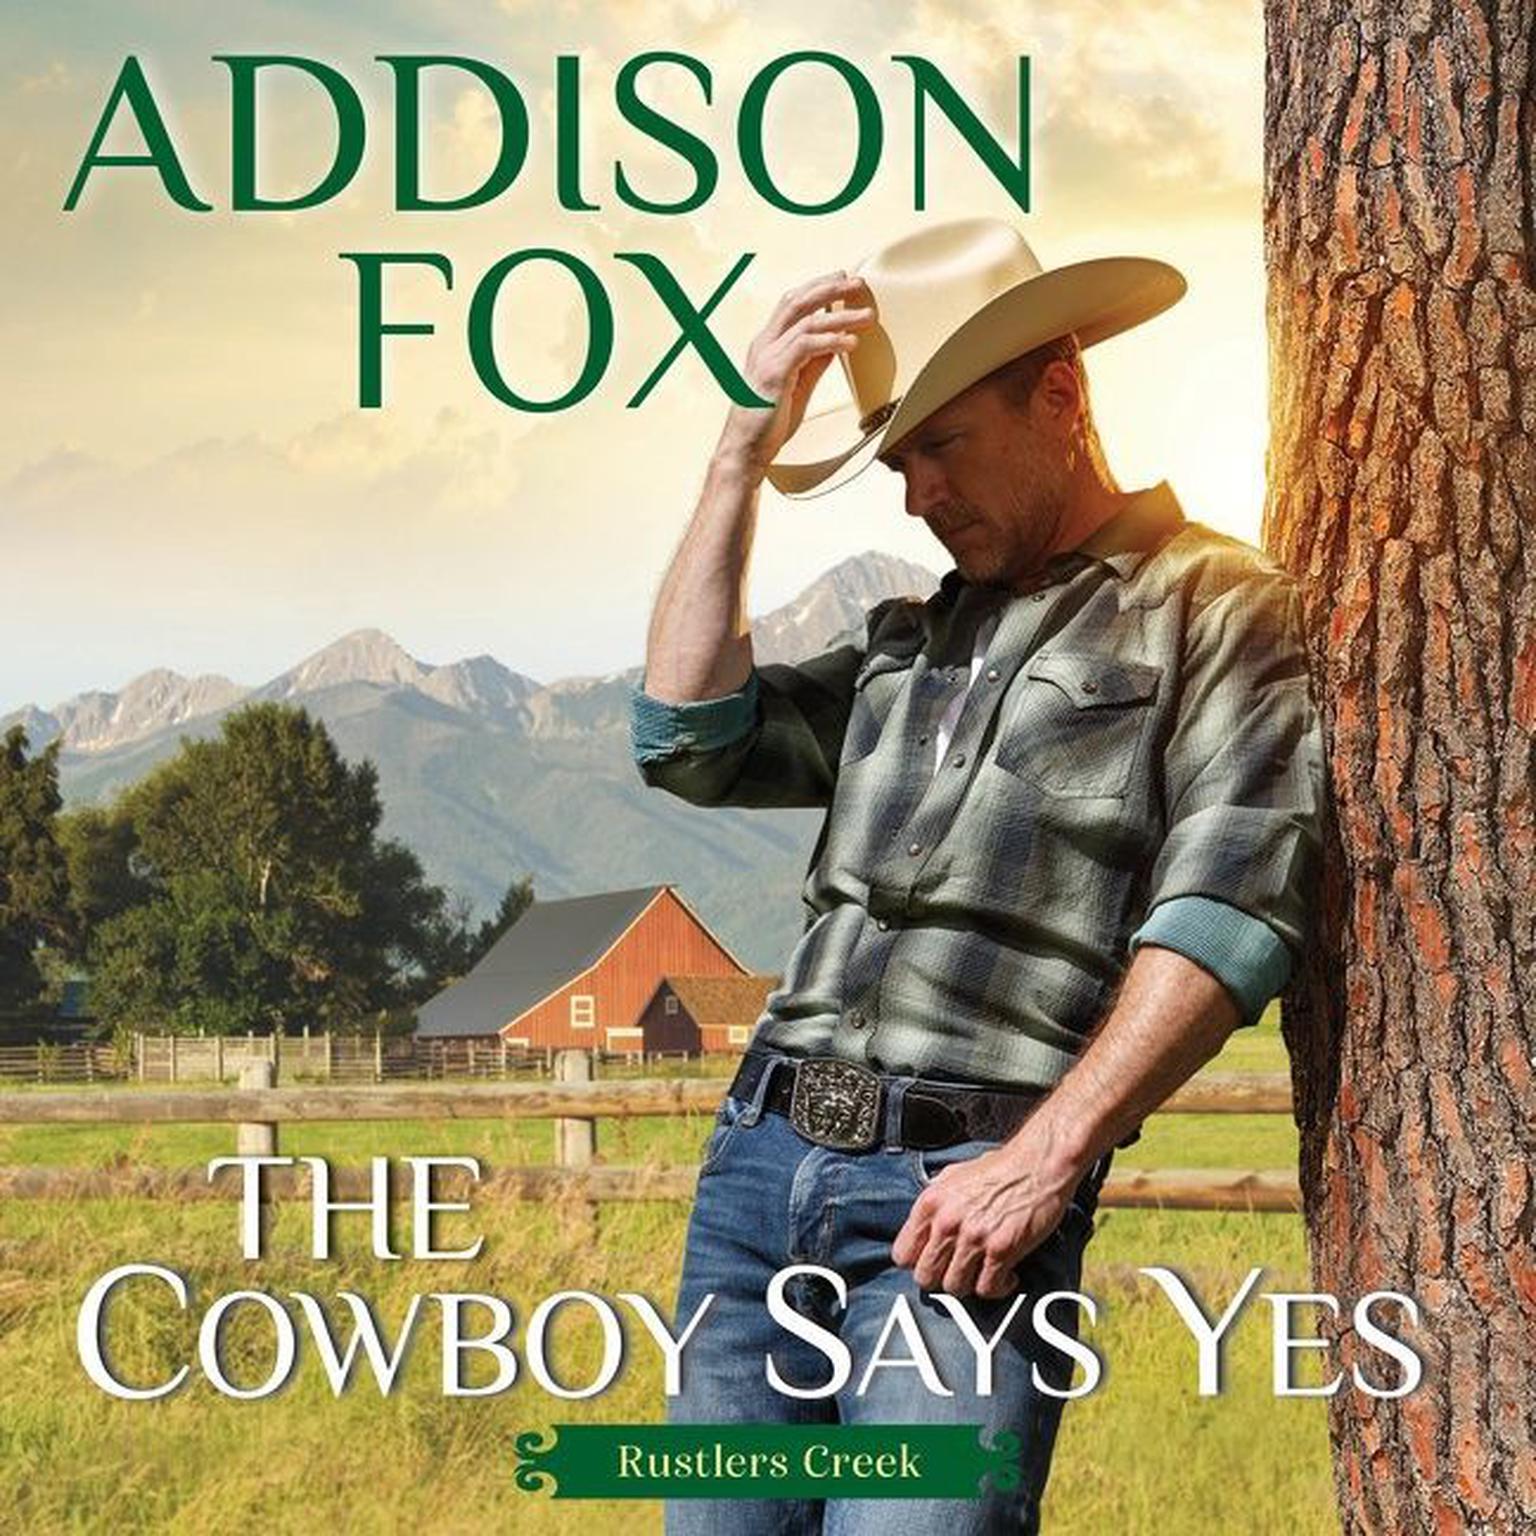 The Cowboy Says Yes: Rustlers Creek Audiobook, by Addison Fox